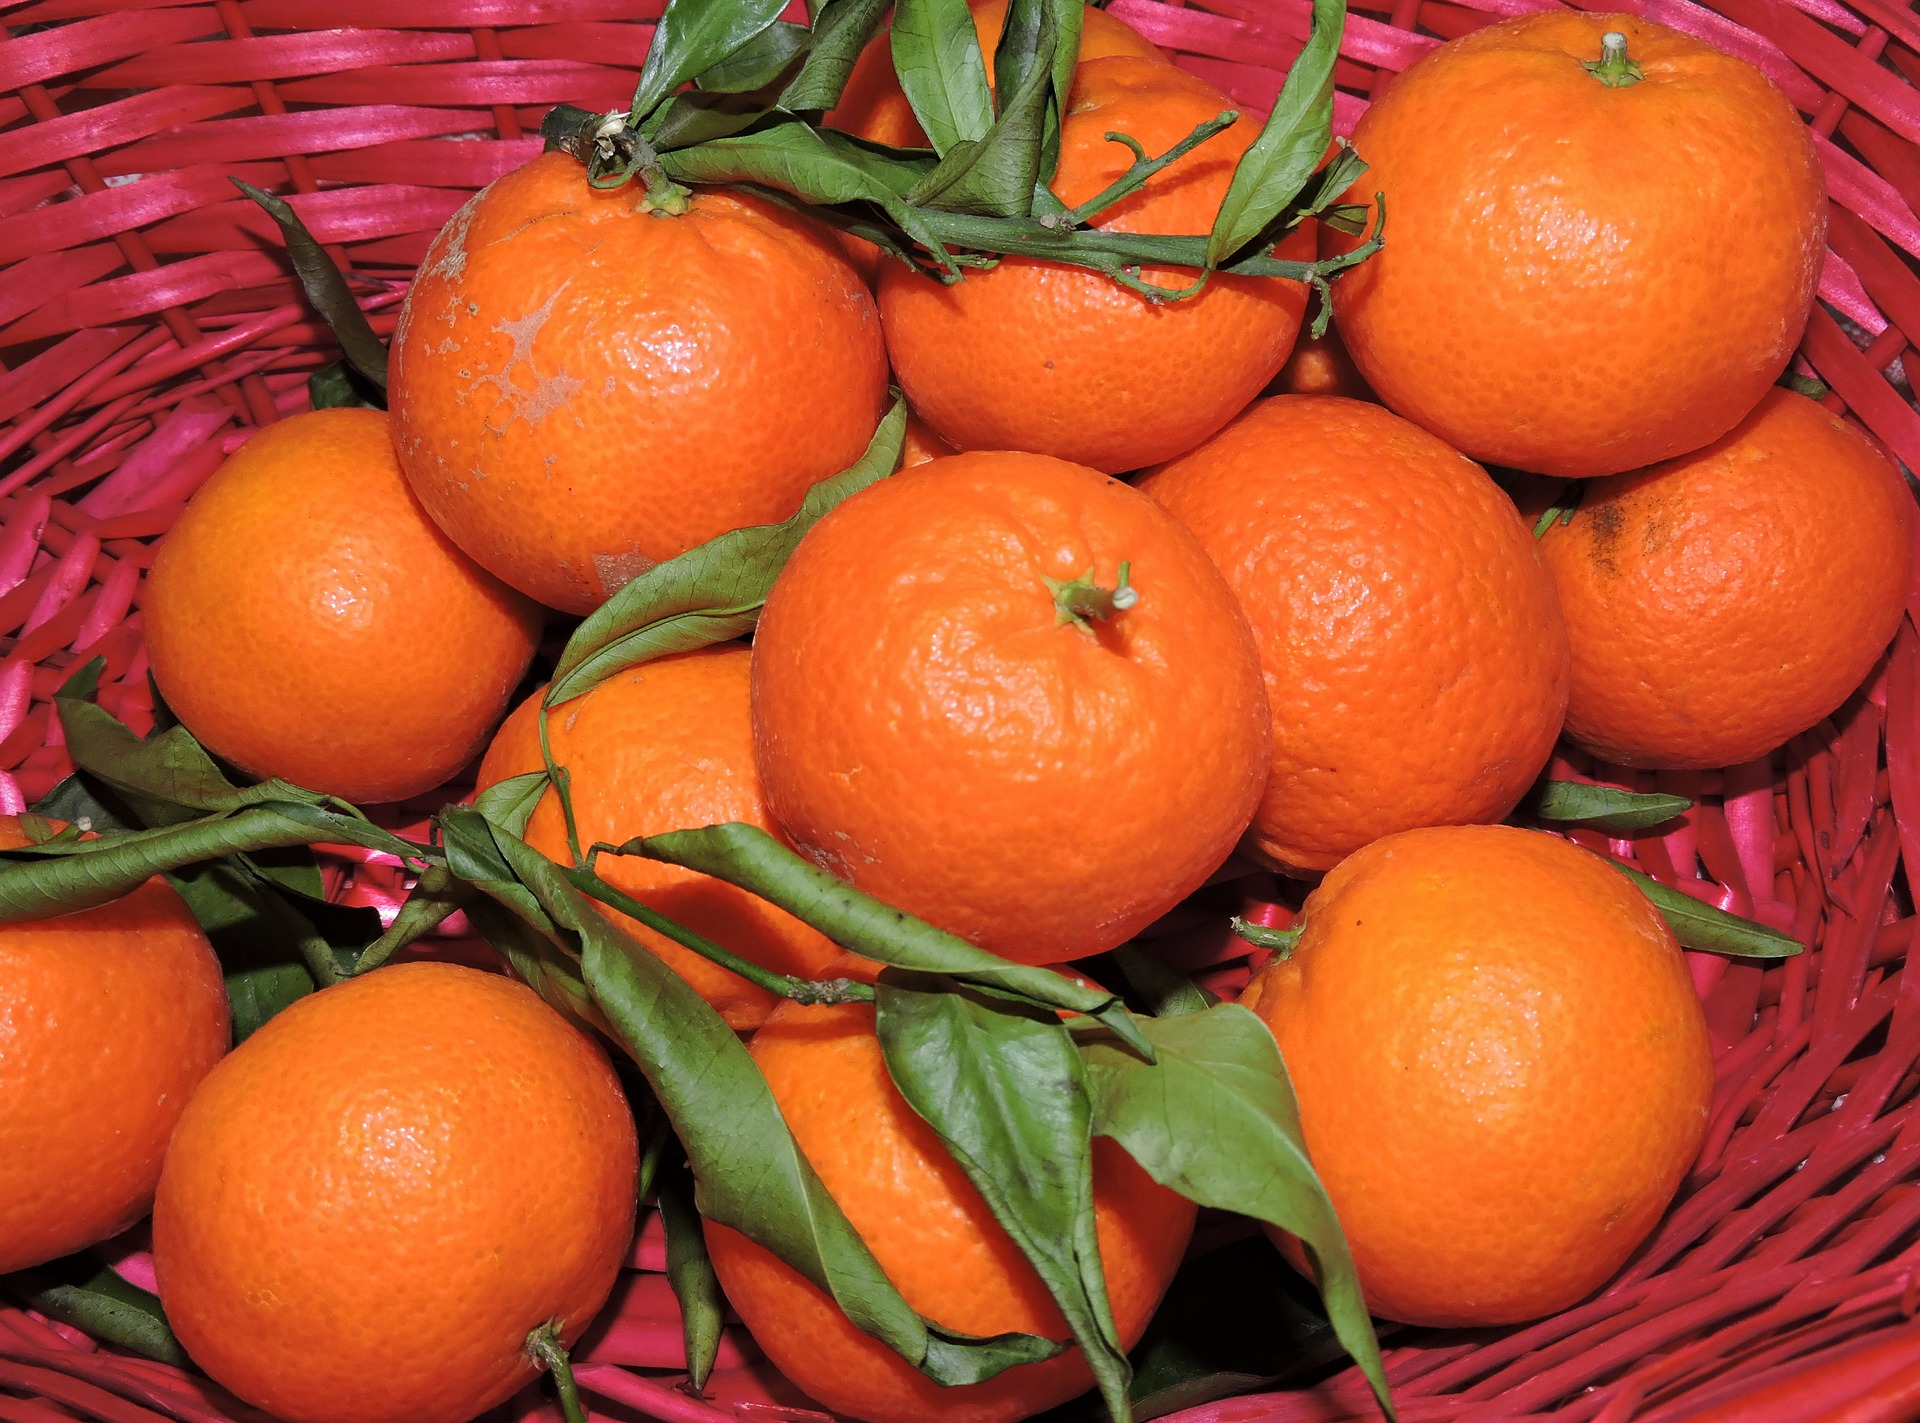 7 Health Benefits Of Clementine - DoveMed